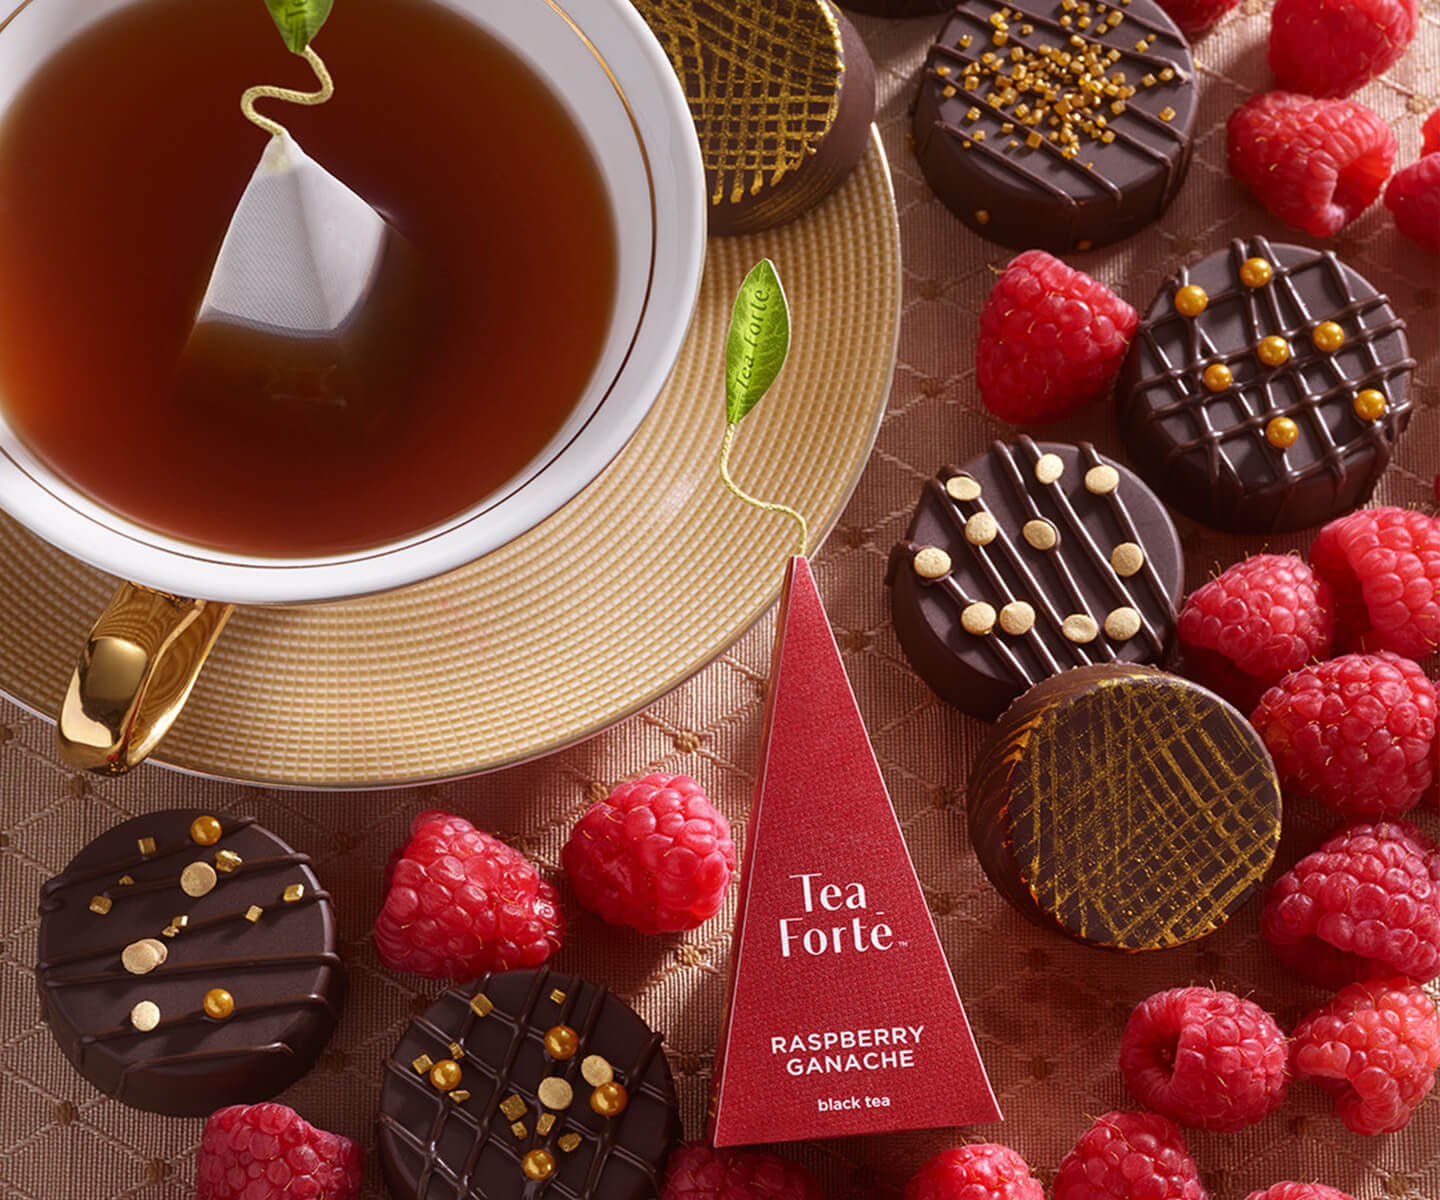 Tea Forté pyramid infuser with chocolates.